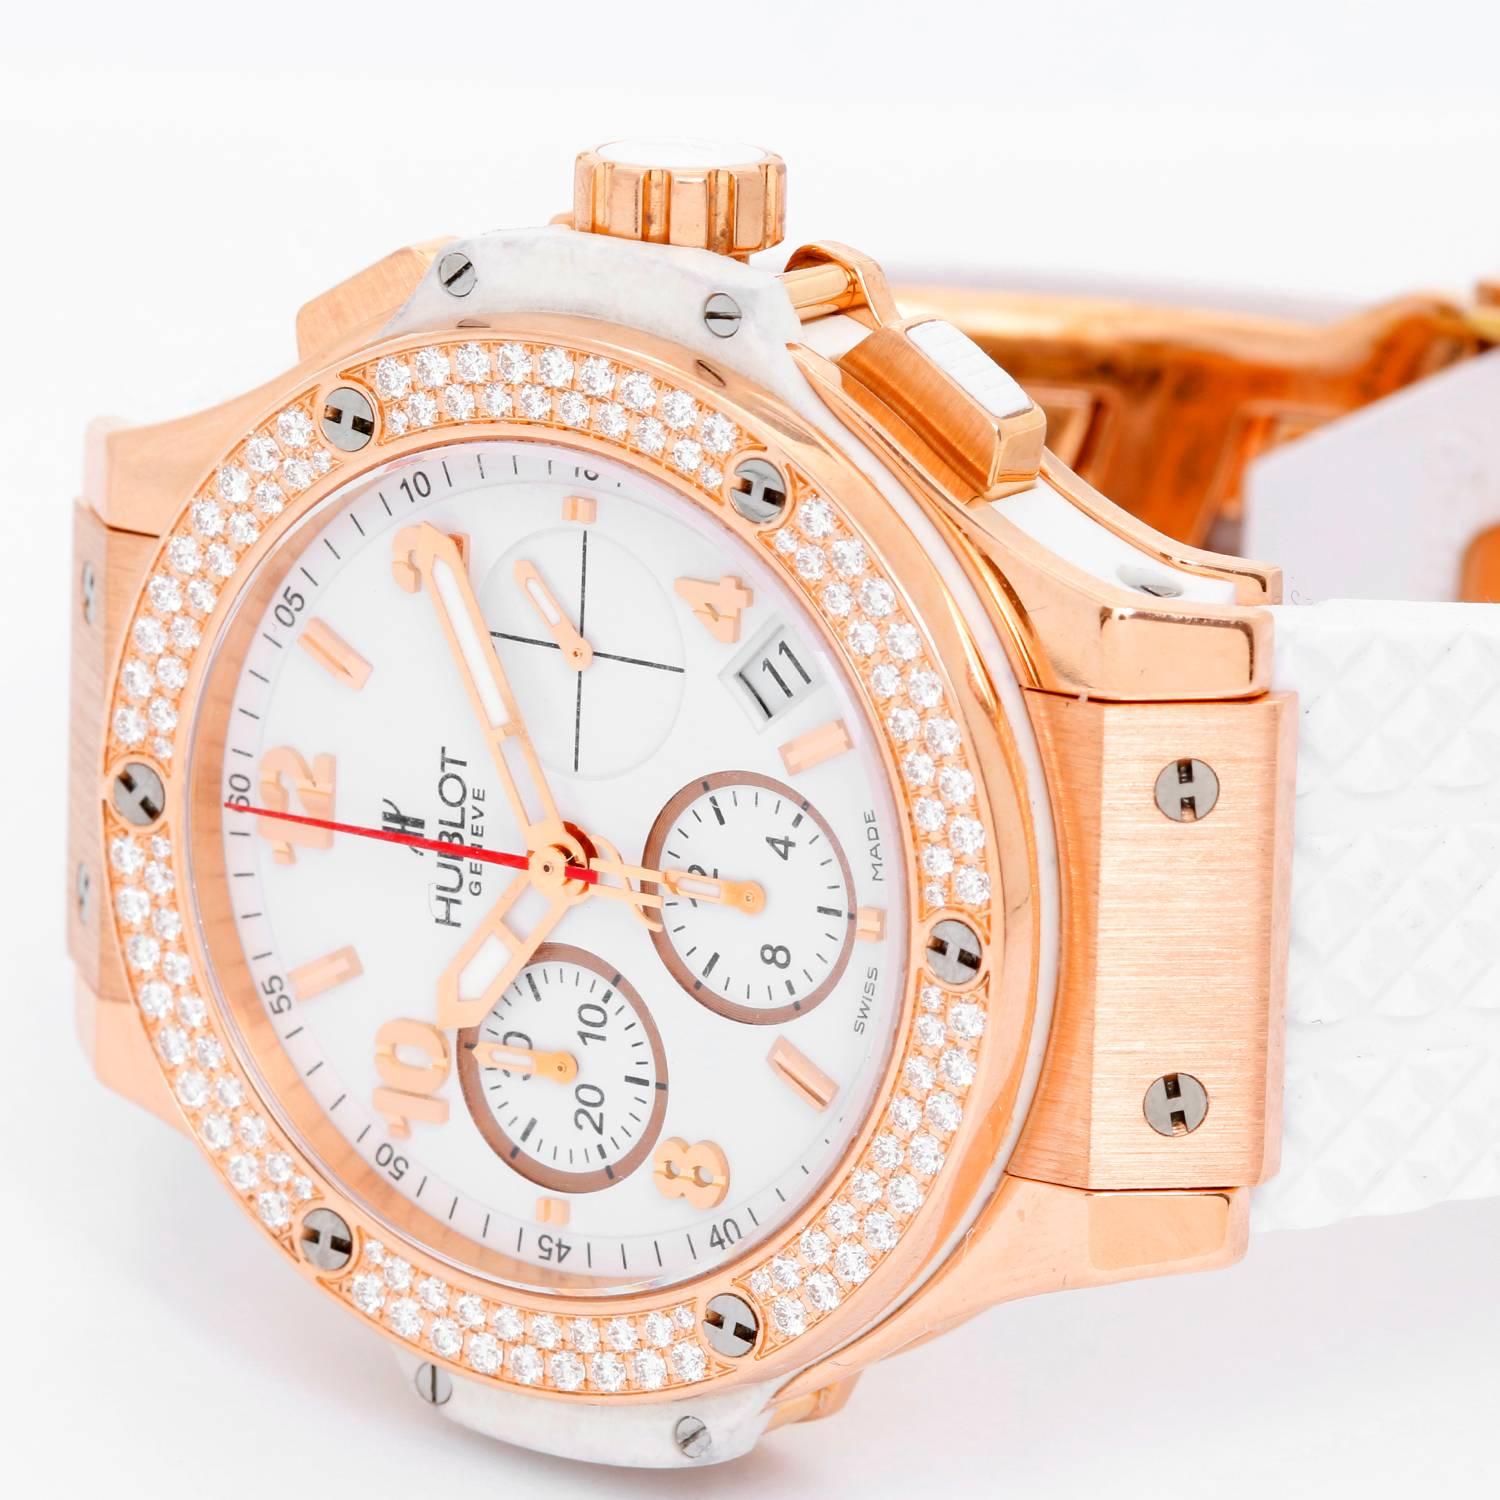 Hublot Big Bang Portocervo 18k Rose Gold Unisex Watch 341.PE.230.RW.114 -  Automatic winding chronograph. 18k rose gold case with 114 Diamond bezel (41mm). White dial with rose gold Arabic numerals and stick markers; hour, minute and seconds